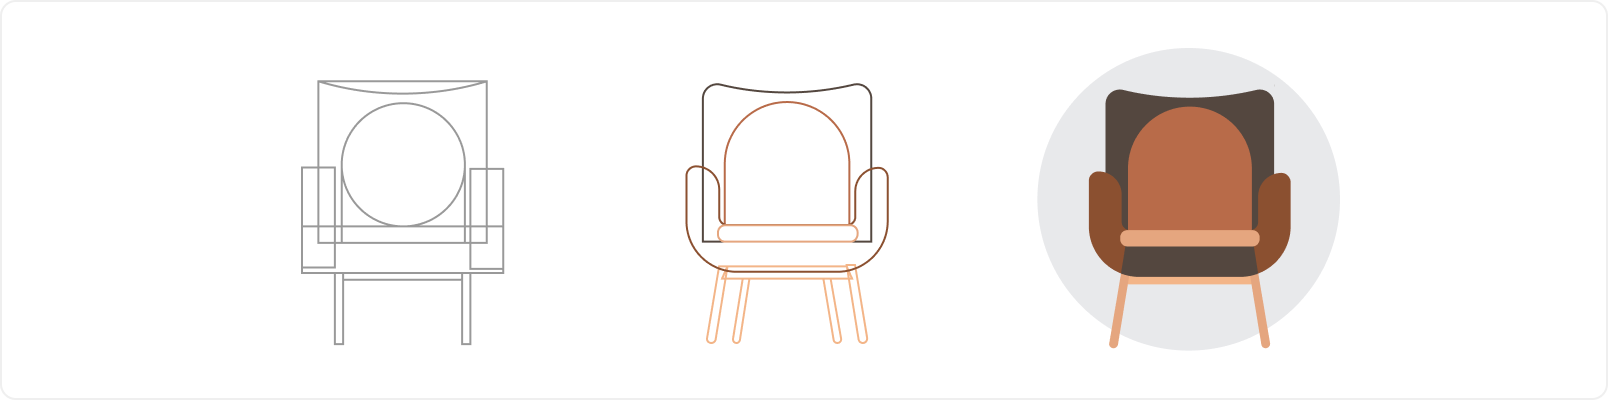 An stylized illustration of a chair with red lines defining its angles, next to an illustration of the profile of a person, with red lines to emphasize where curves are used.